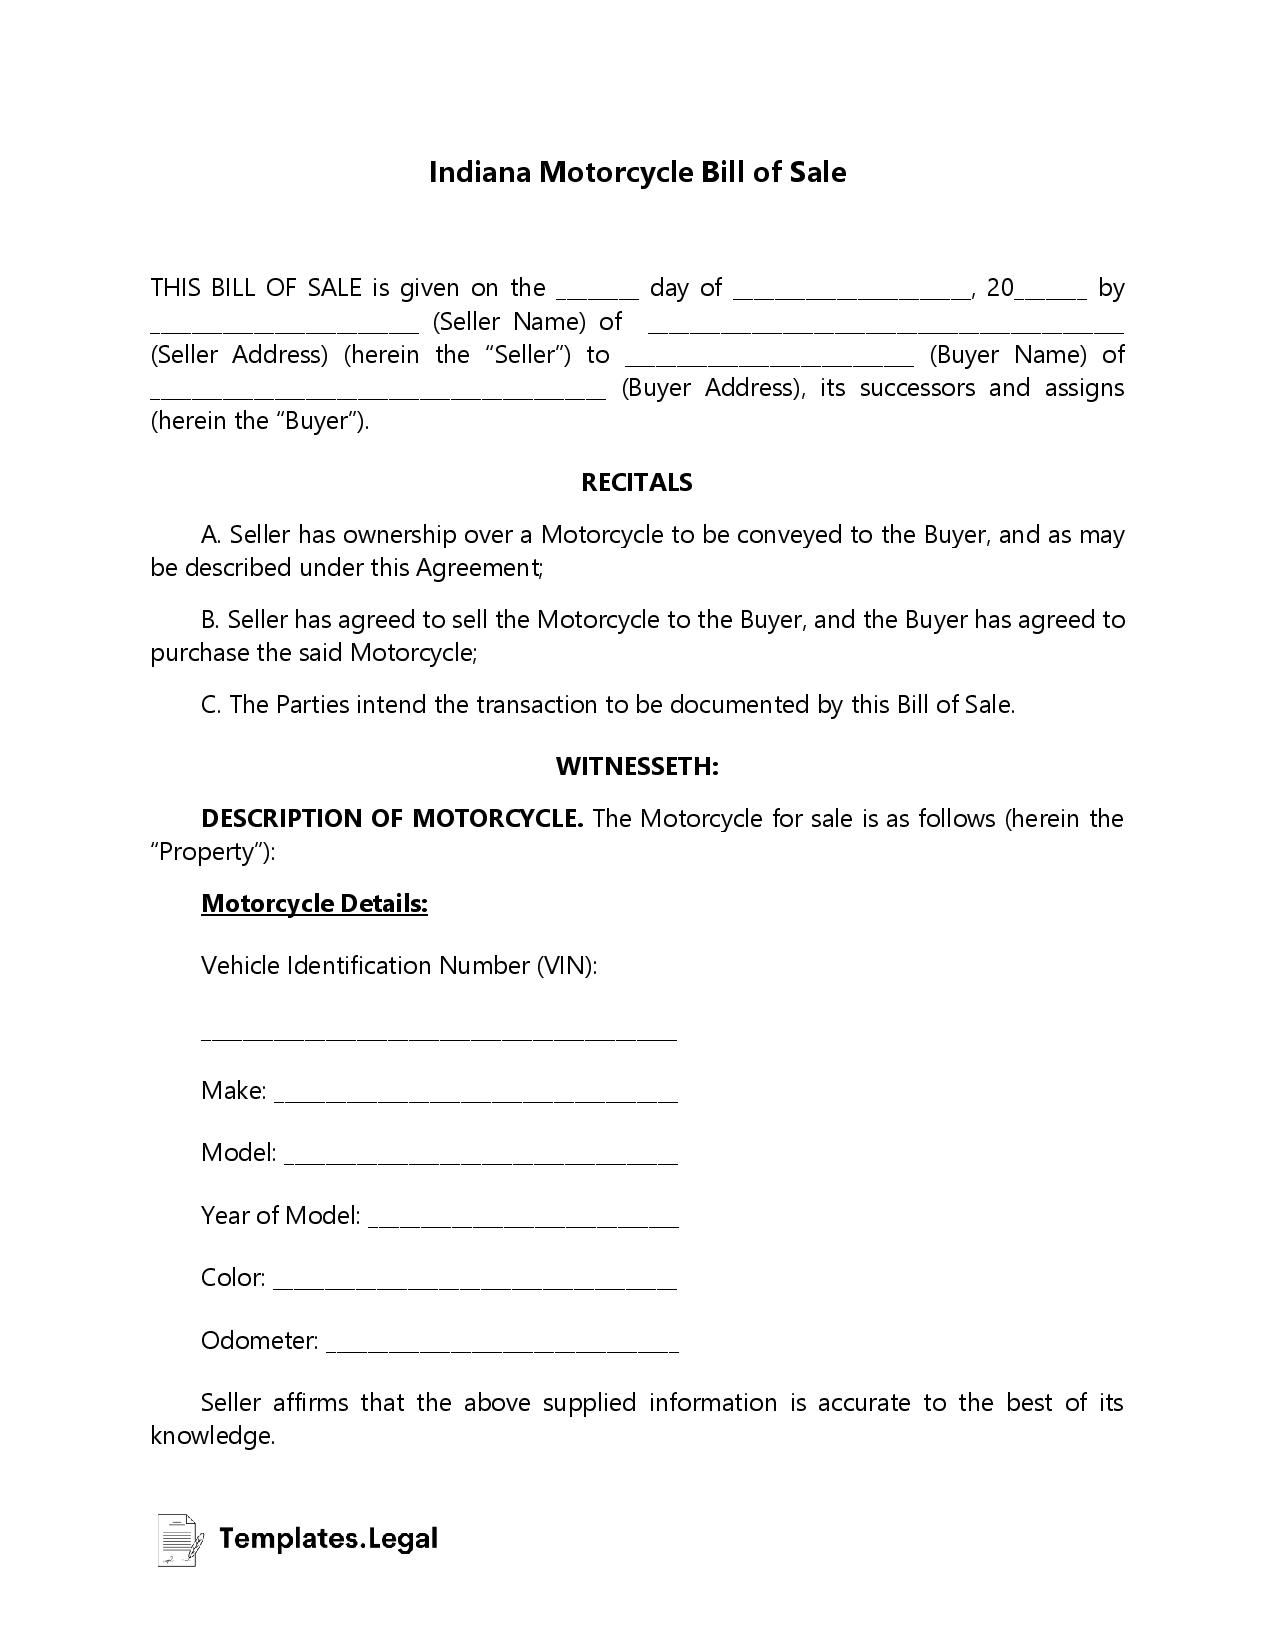 Indiana Motorcycle Bill of Sale - Templates.Legal